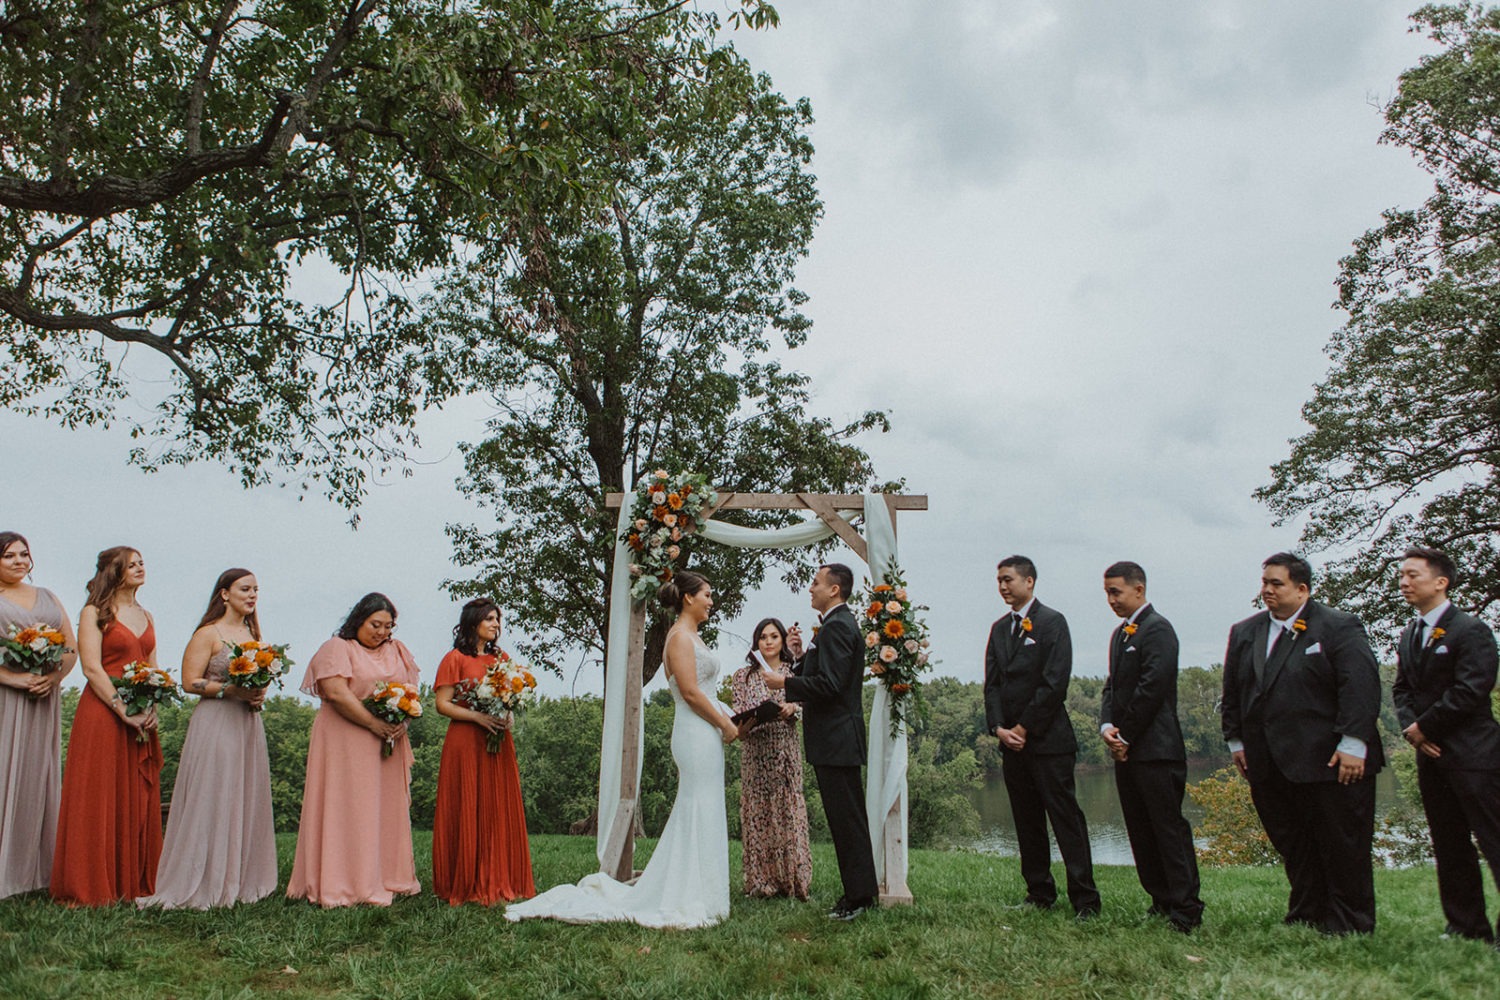 Couple exchanges vows at outdoor wedding